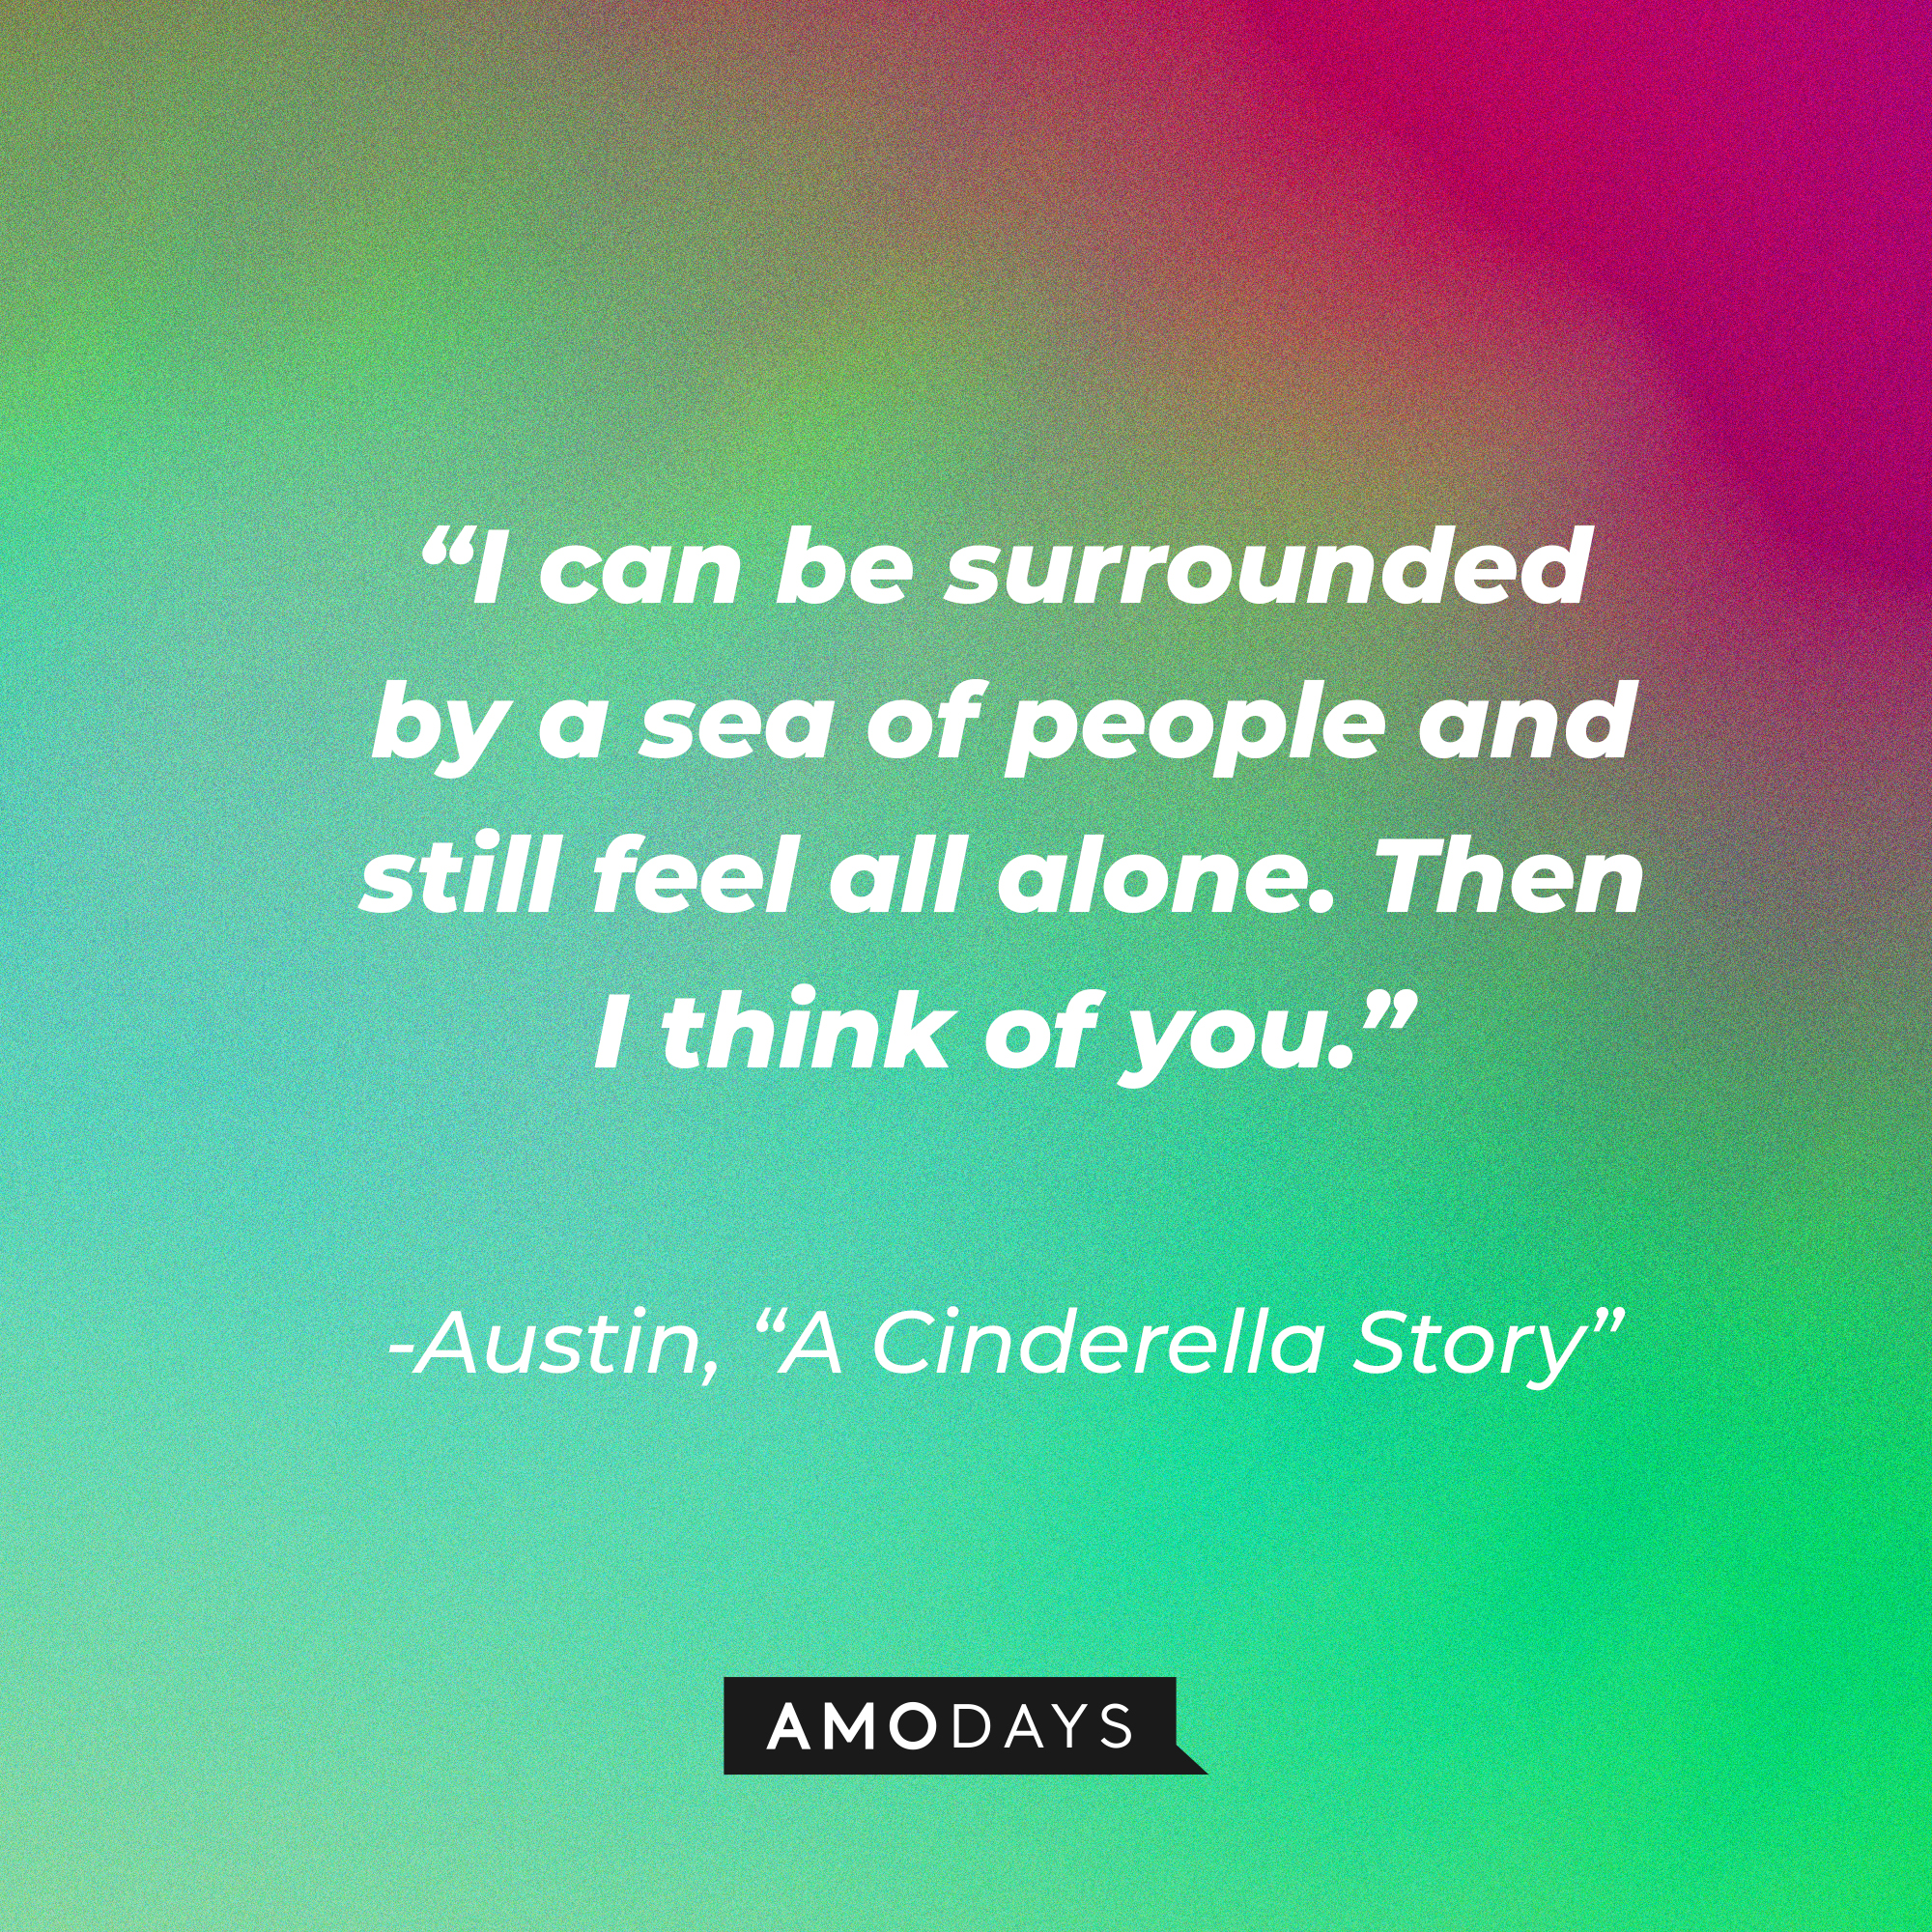 Austin Ames' quote from "A Cinderella Story:" “I can be surrounded by a sea of people and still feel all alone. Then I think of you.”  | Source: Youtube.com/warnerbrosentertainment